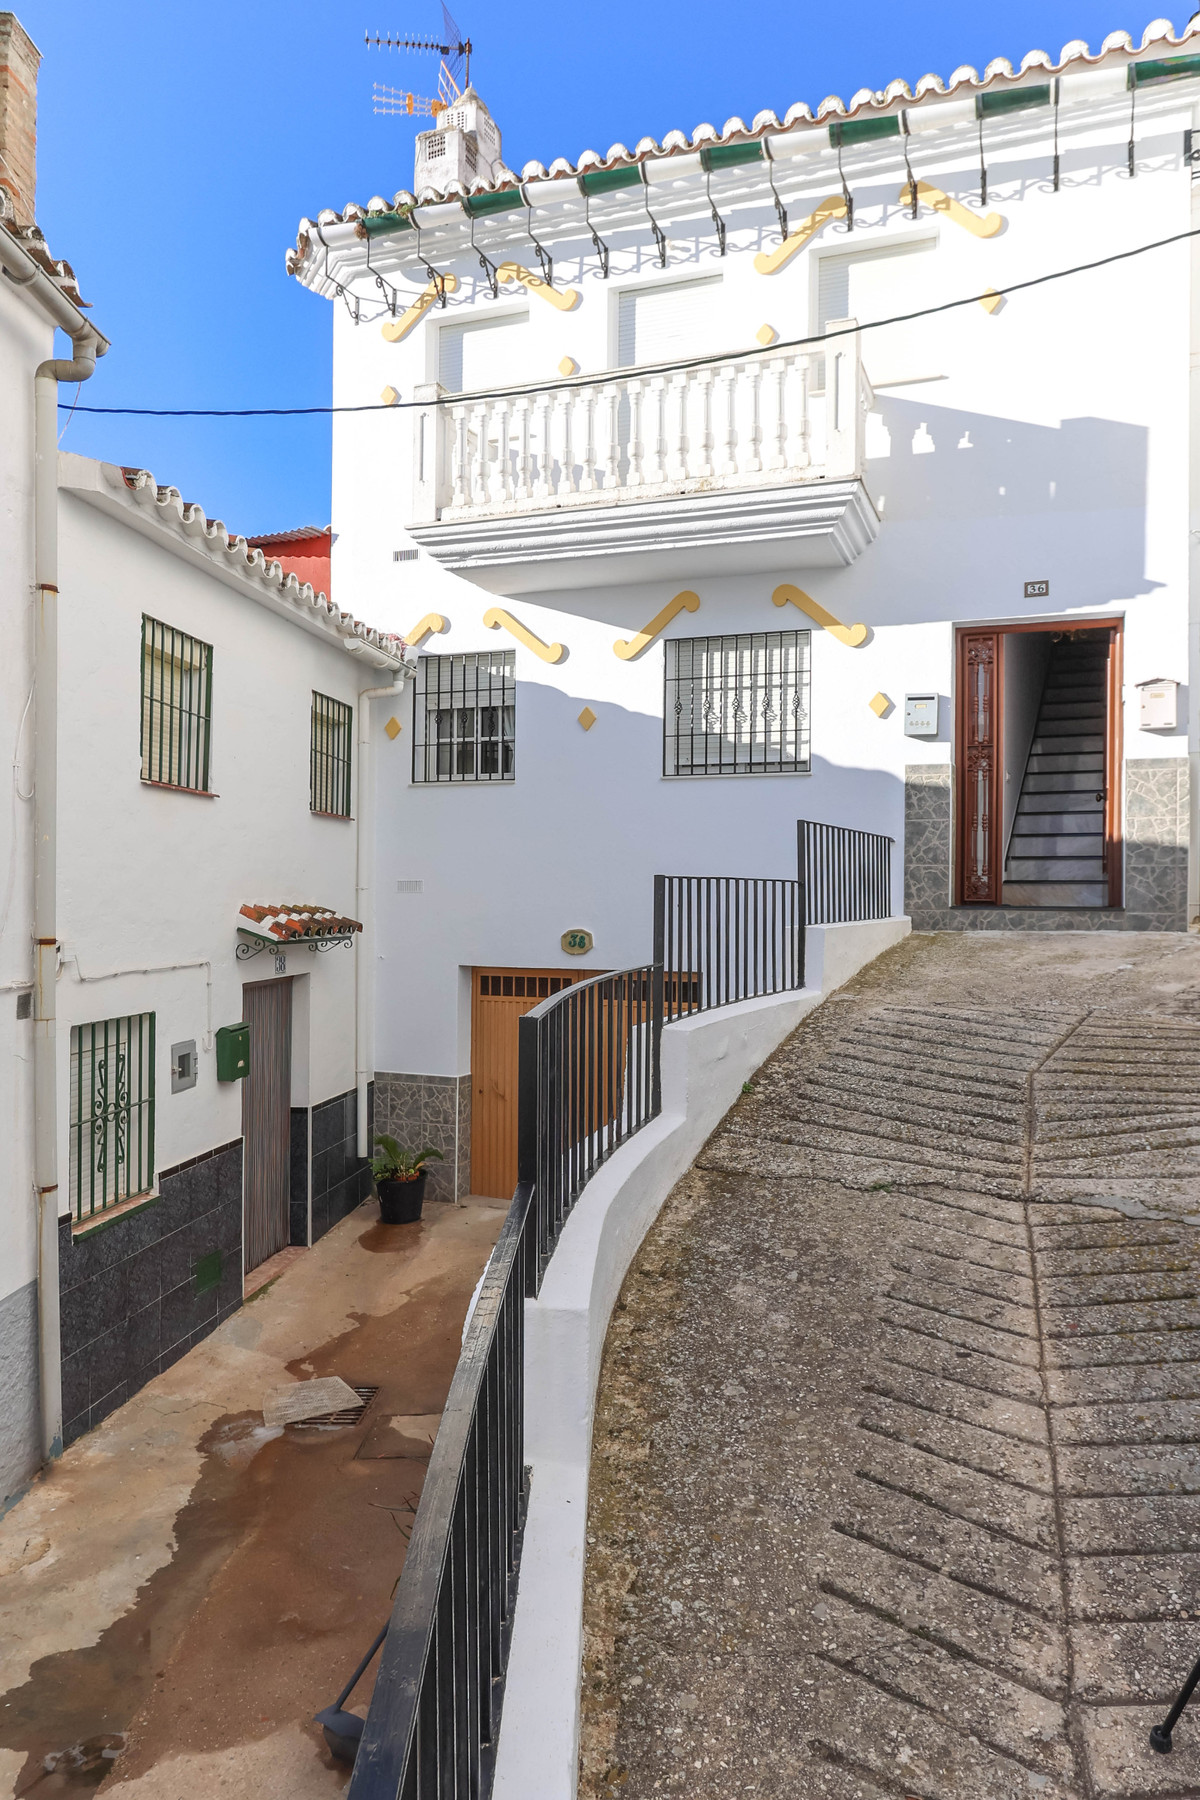 DUPLEX Apartment

. Terrace with views
. Sitting in the beautiful village of Yunquera
. EXPERIENCE T, Spain